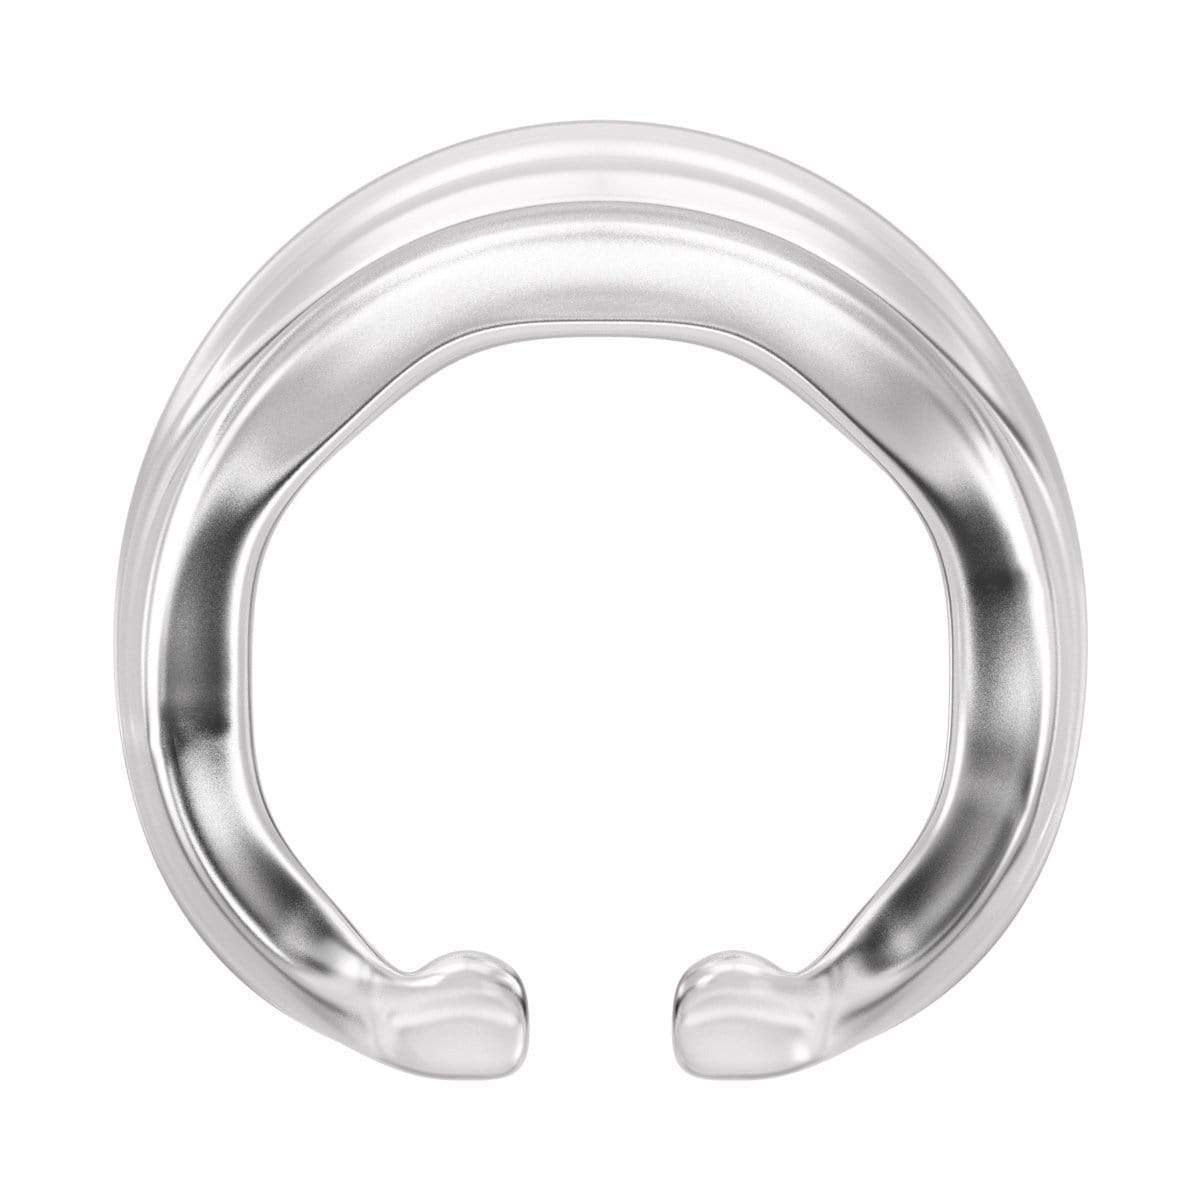 SSI Japan - My Peace Wide Standard Day Size L Correction Cock Ring (Clear) Cock Ring (Non Vibration) 4582137934107 CherryAffairs